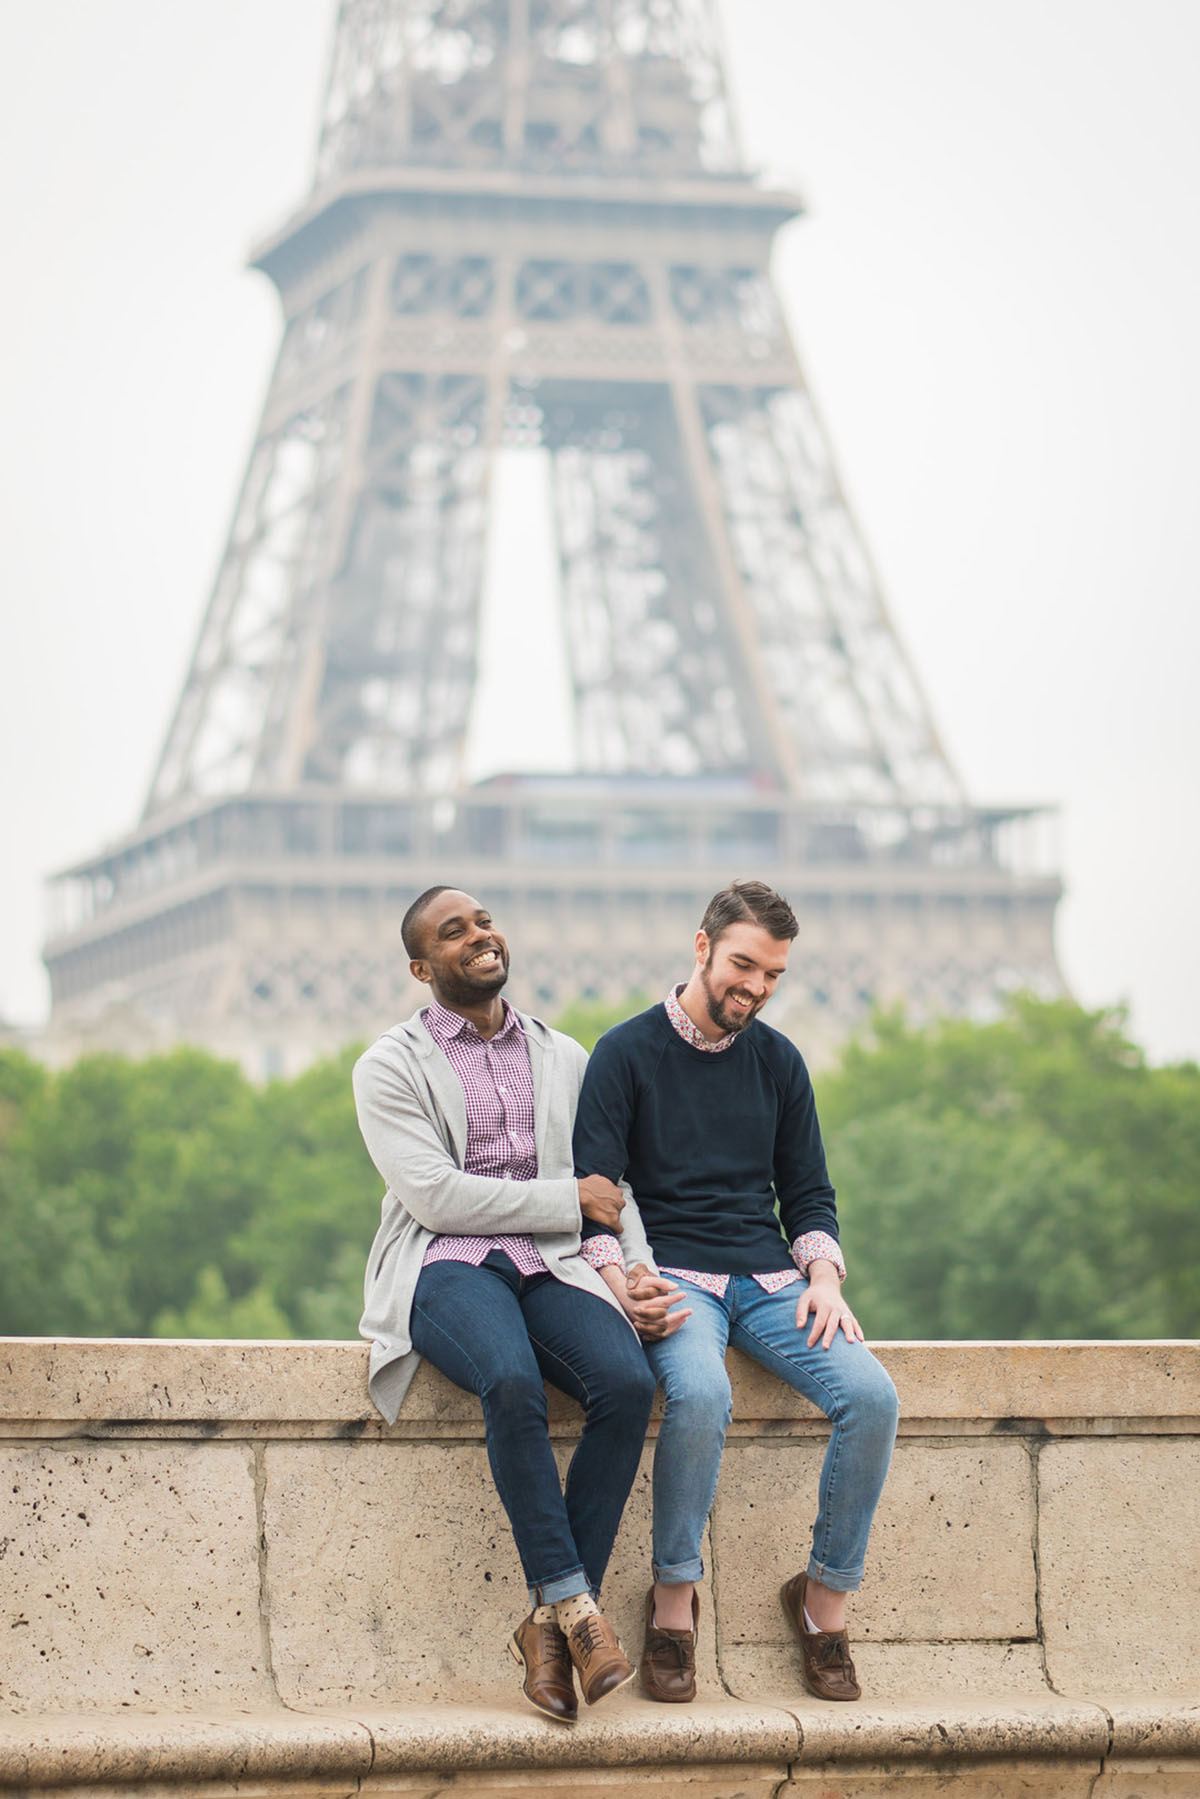 Proposal in front of the Eiffel Tower in Paris, France two grooms gay engagement surprise bridge